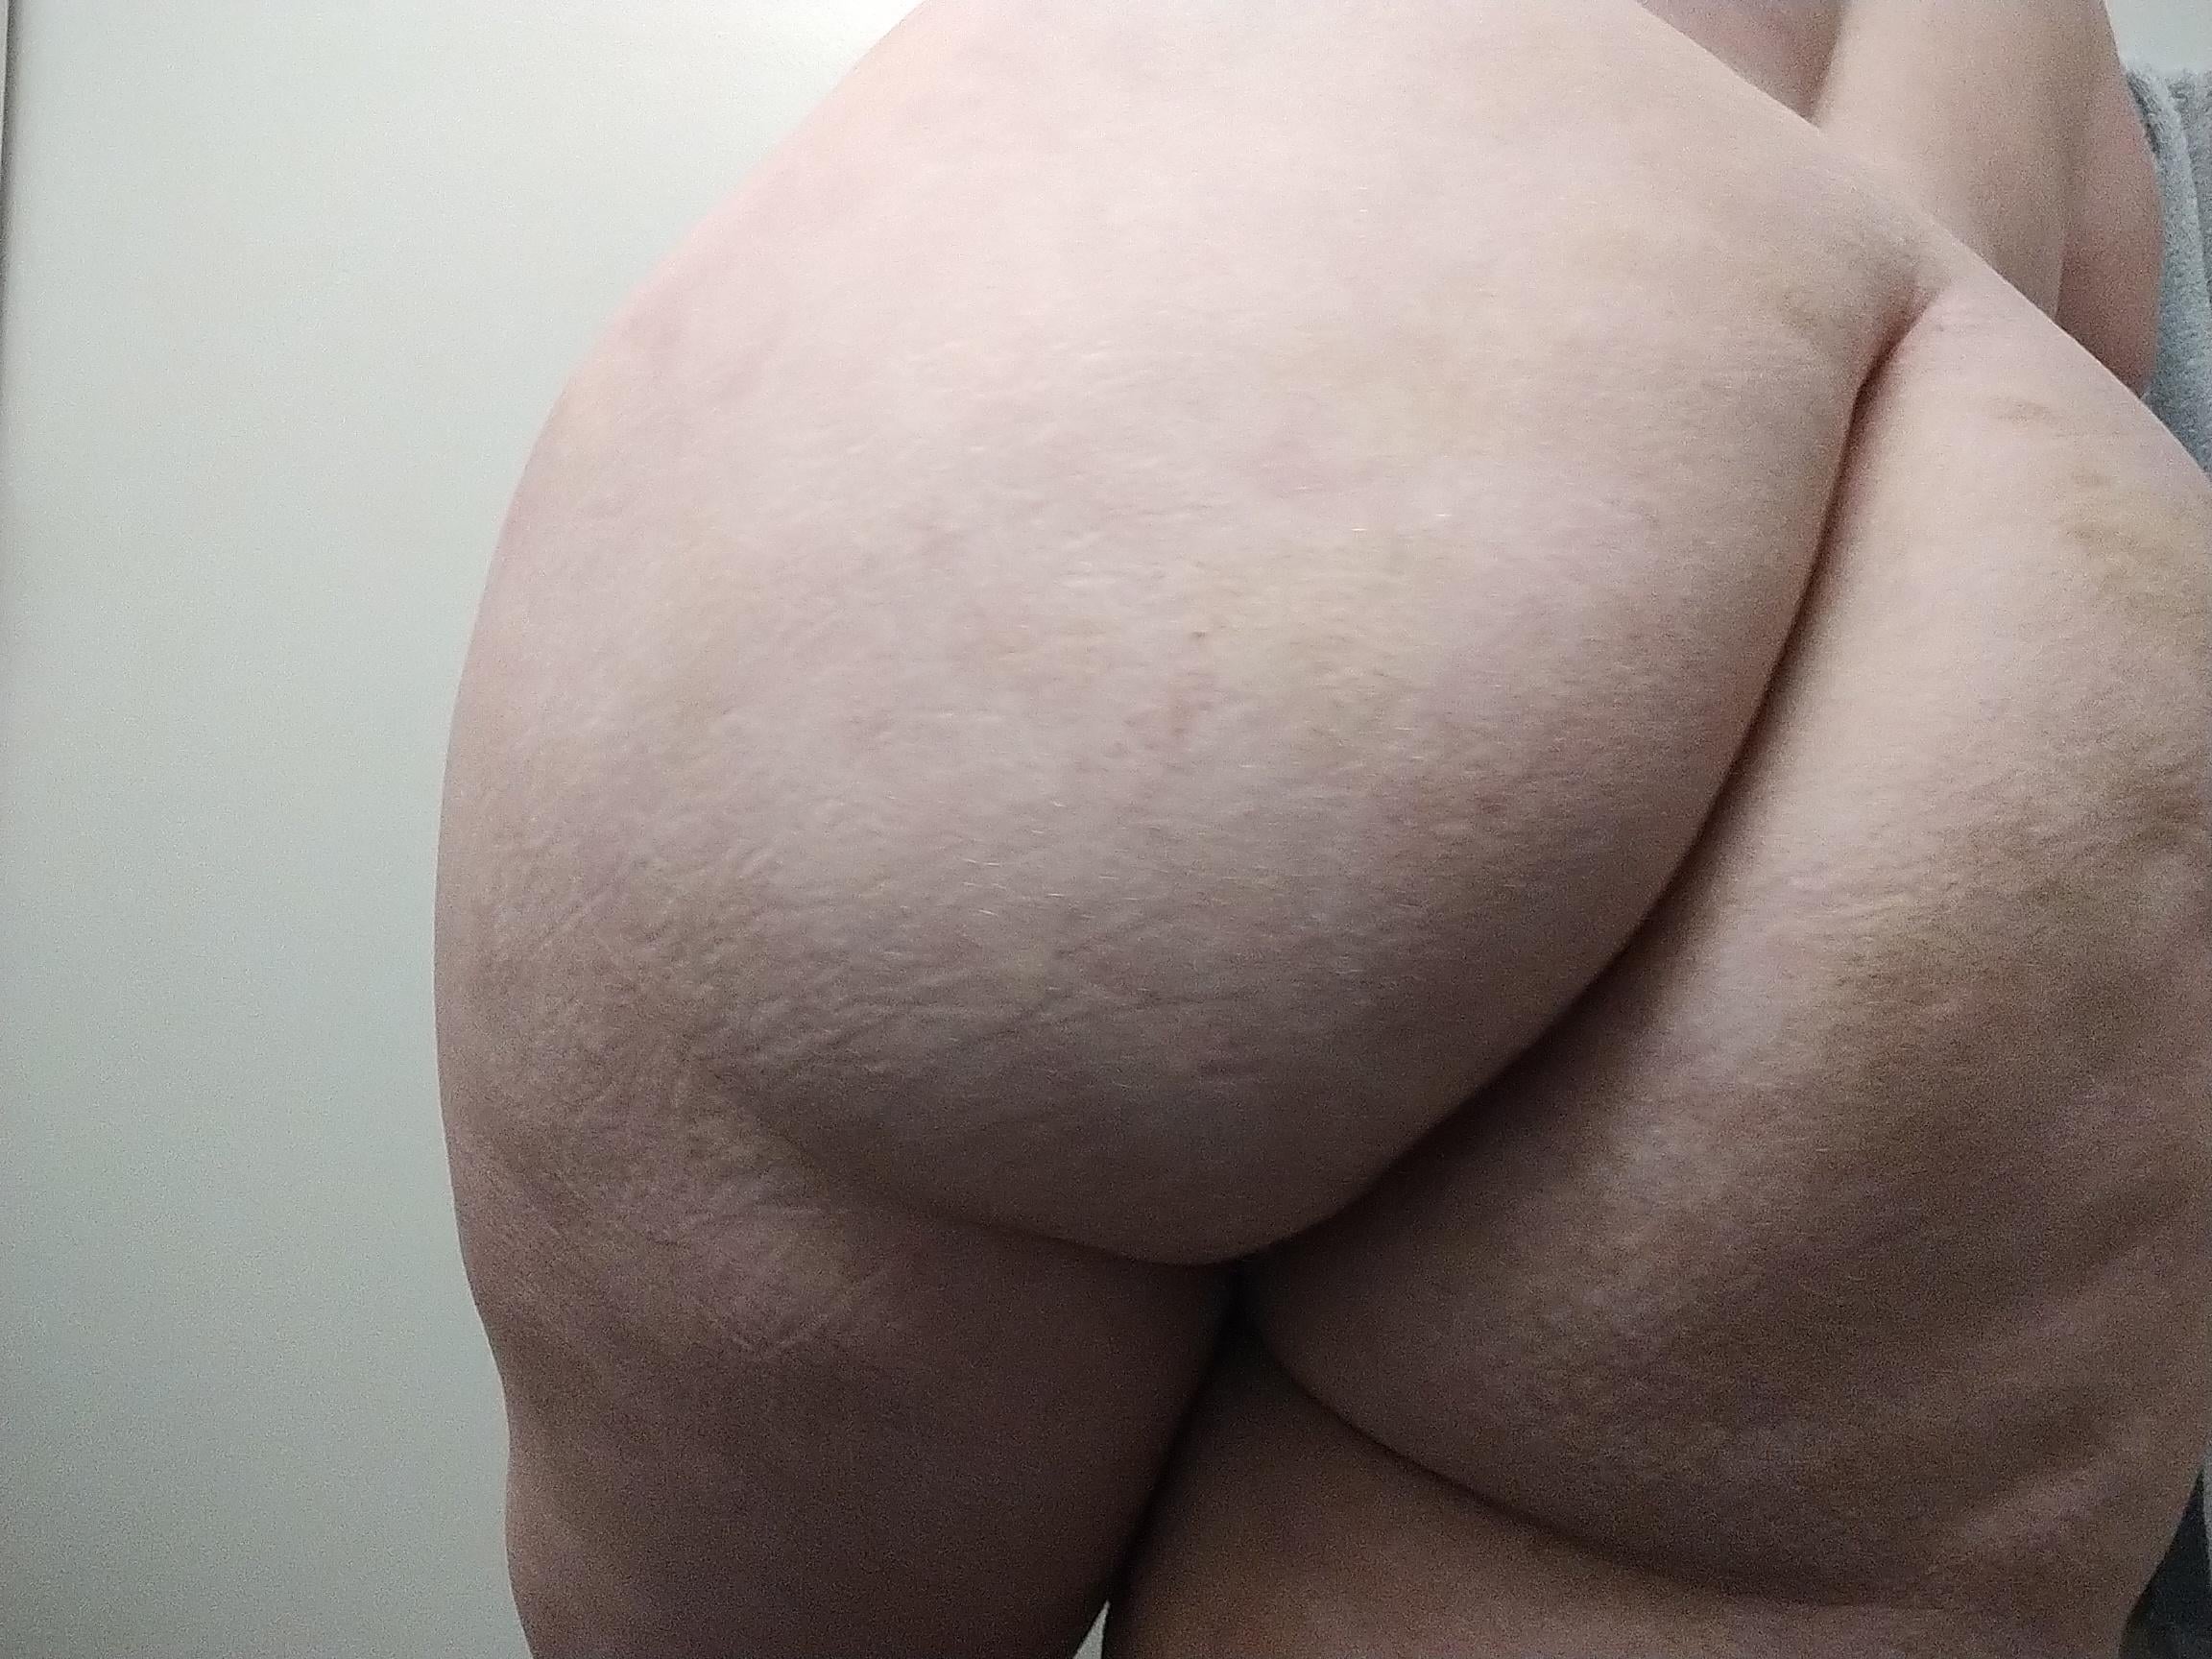 Craving to have my ass spanked and used